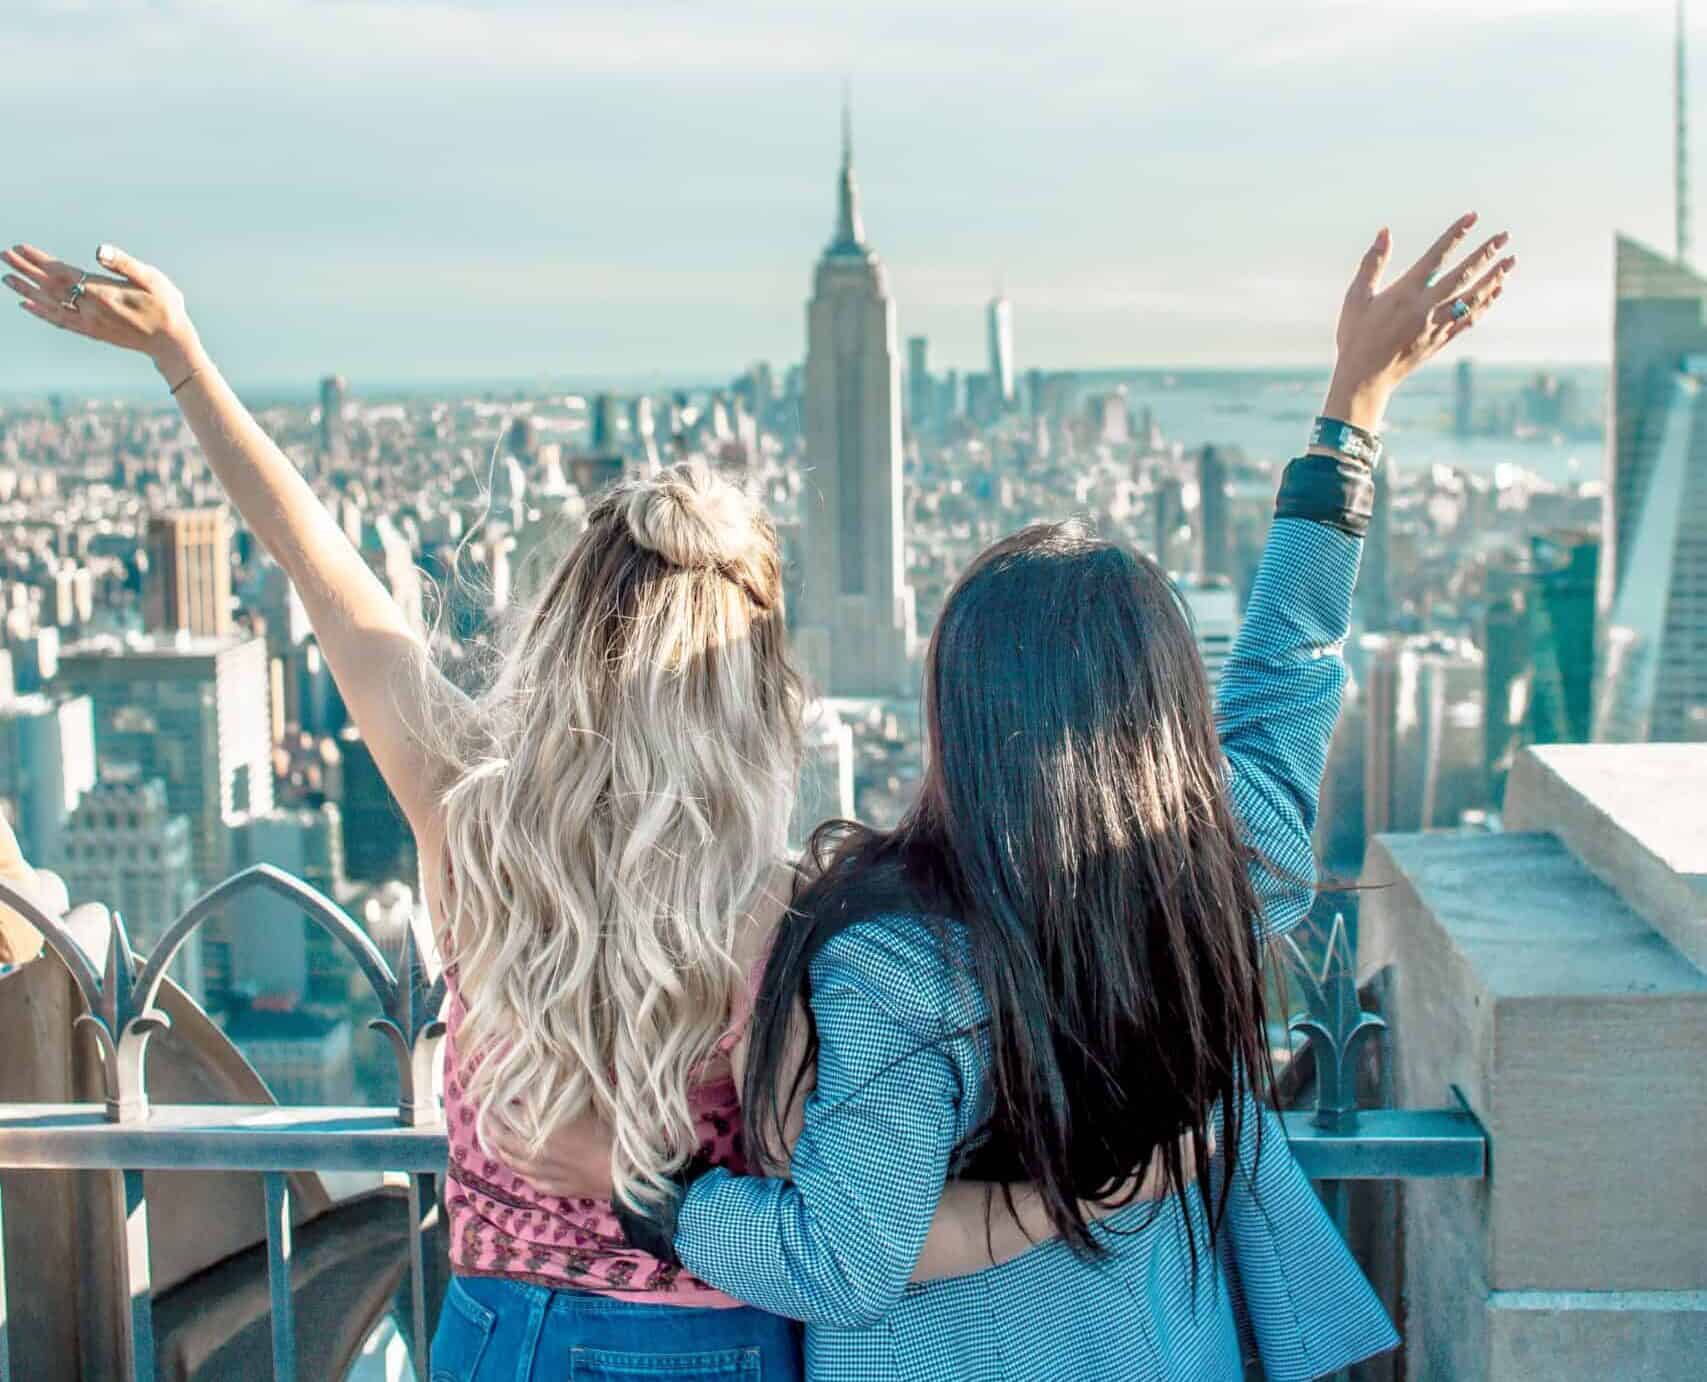 Two young women look at skyscrapers, hug each other and cheer